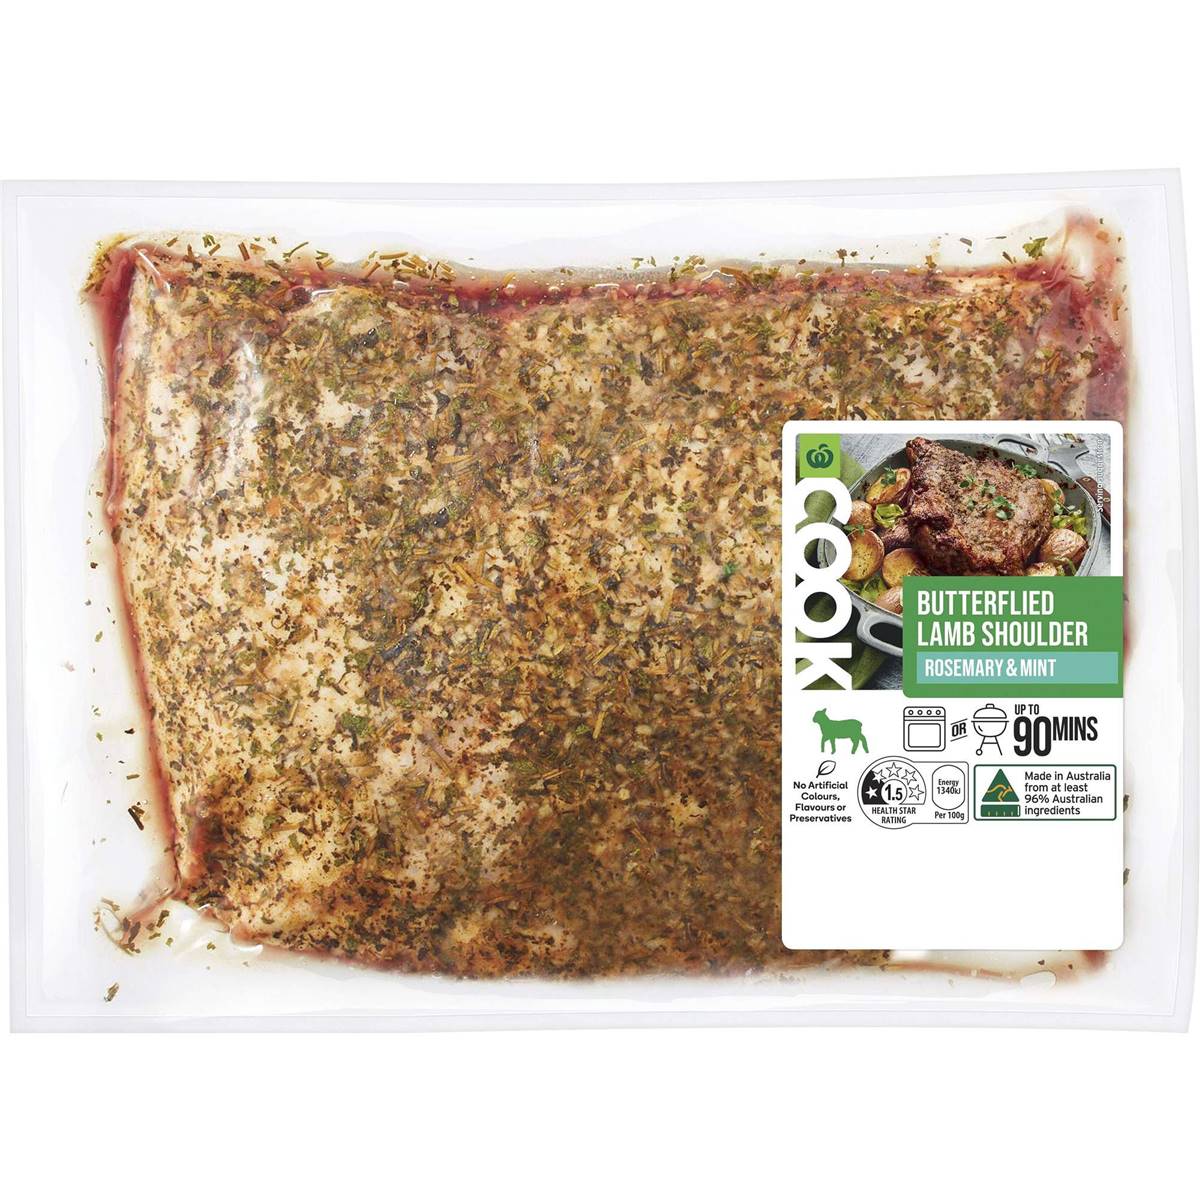 Calories in Woolworths Cook Butterflied Lamb Shoulder With Rosemary & Mint